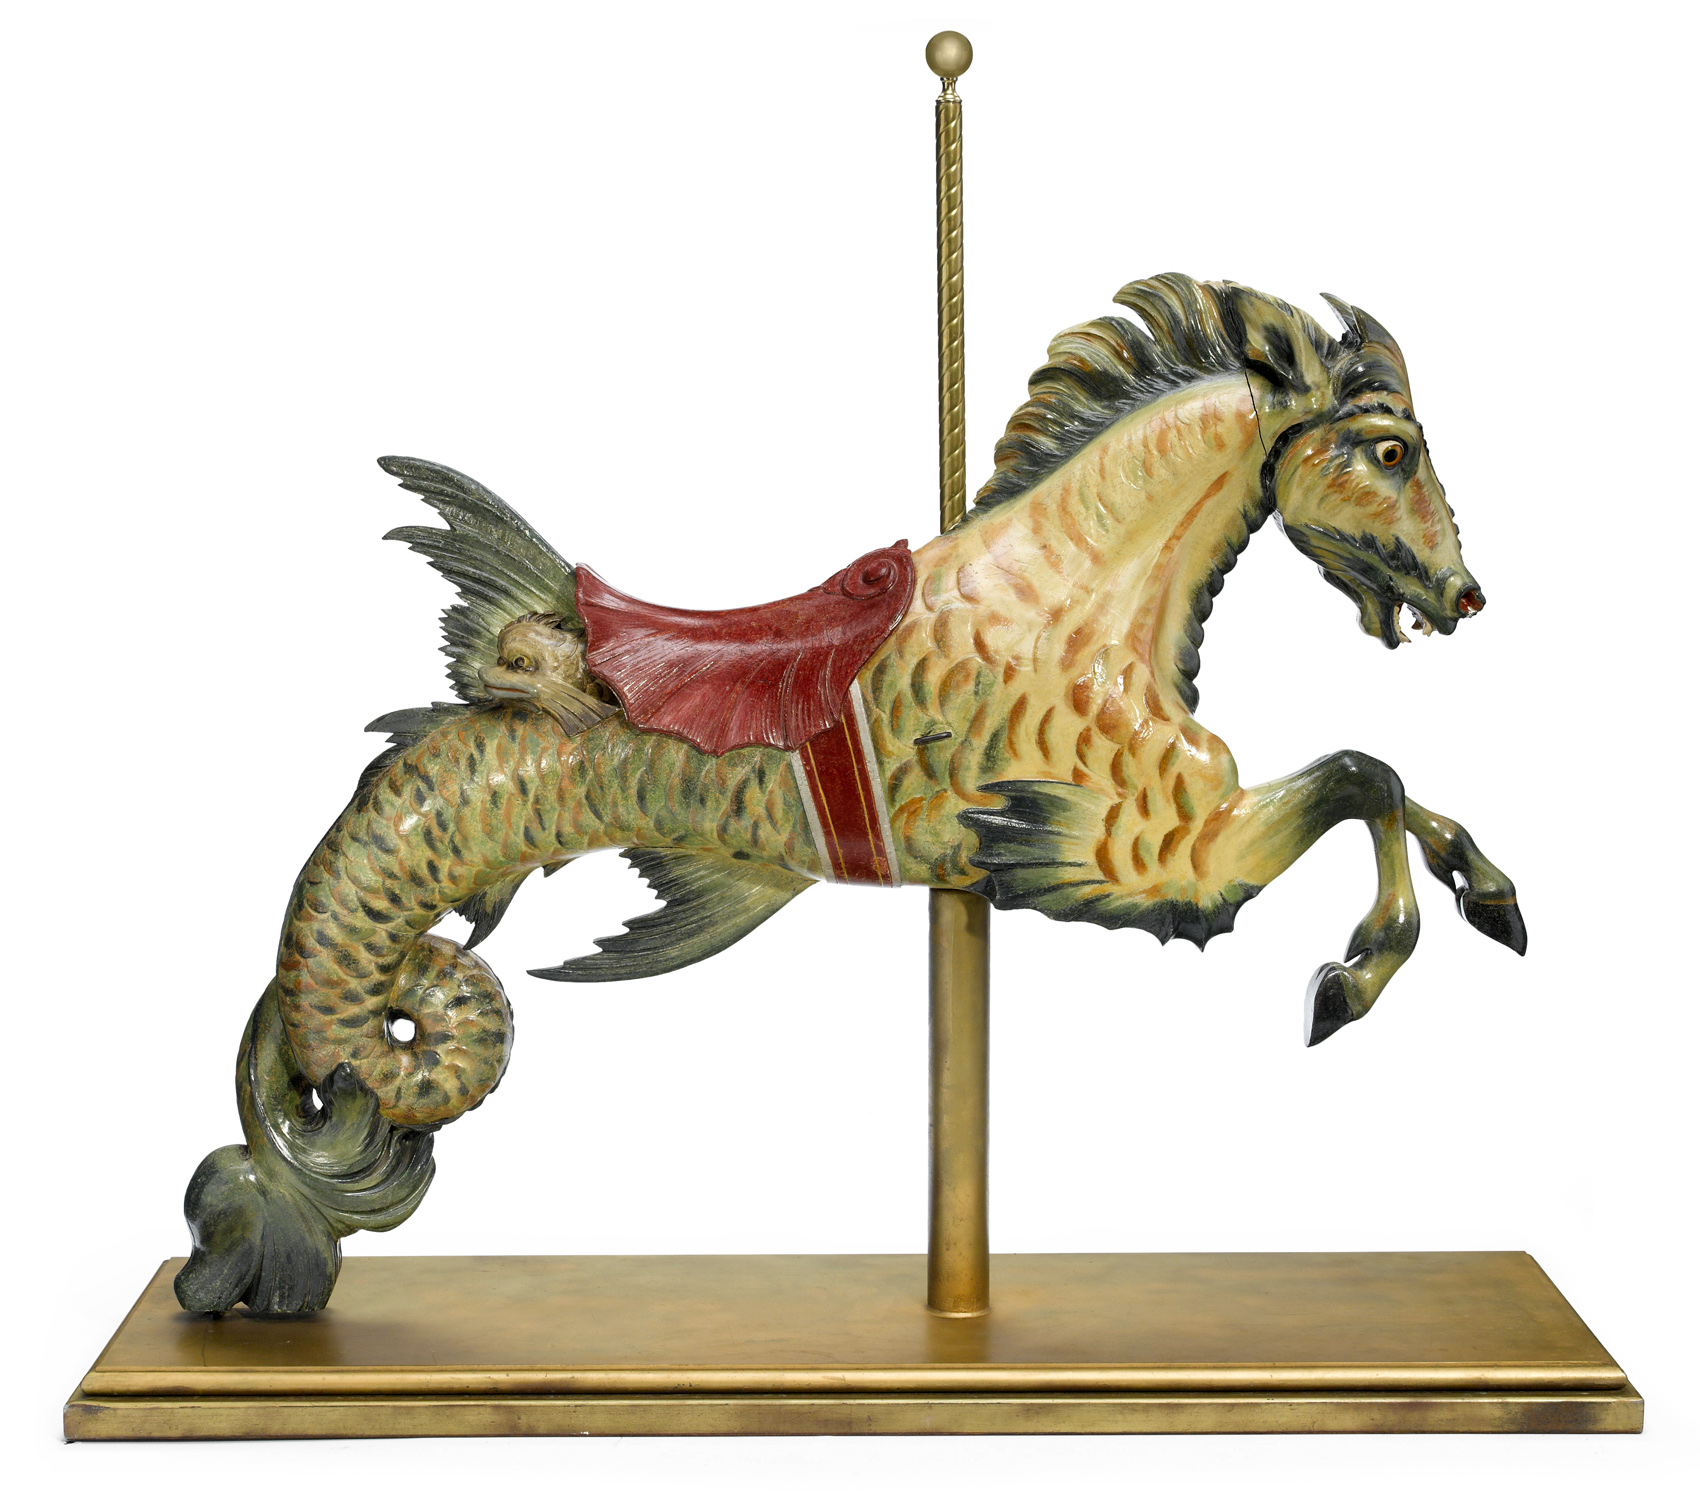 Seahorse Gypsy Vanner Hippocampi Carousel Horse cards 